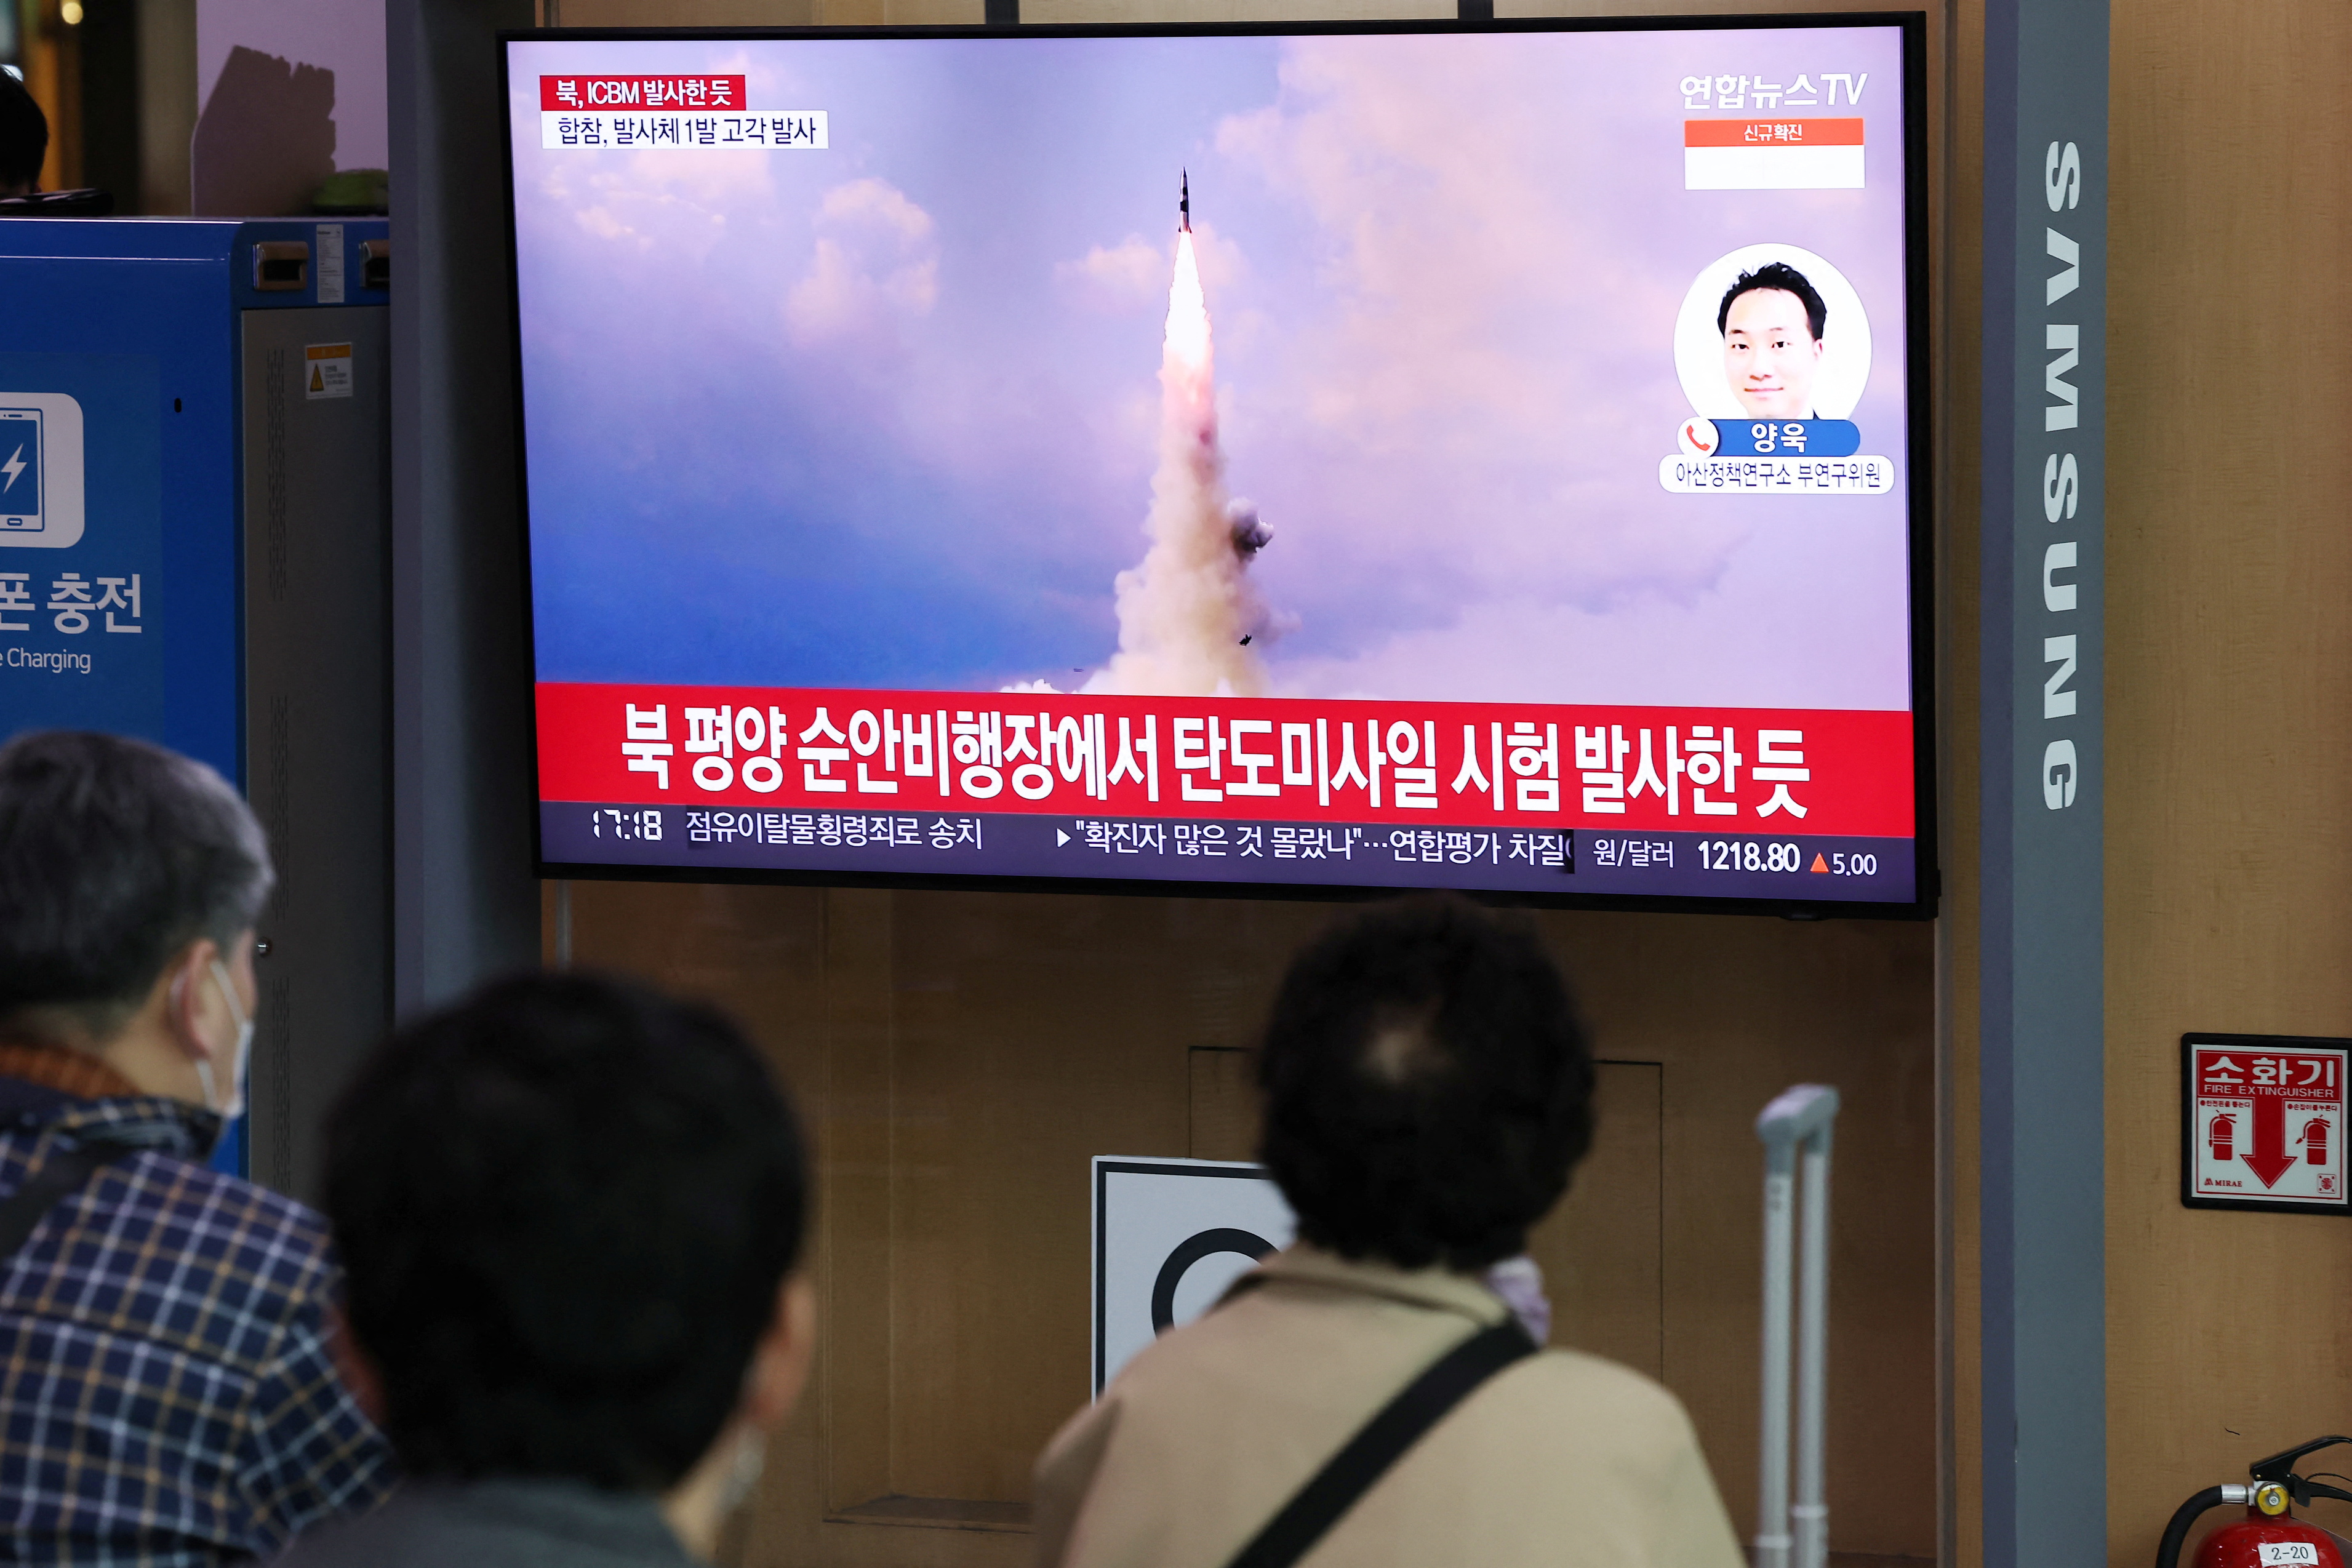 People watch a TV broadcasting a news report on North Korea's intercontinental ballistic missile (ICBM) test, in Seoul